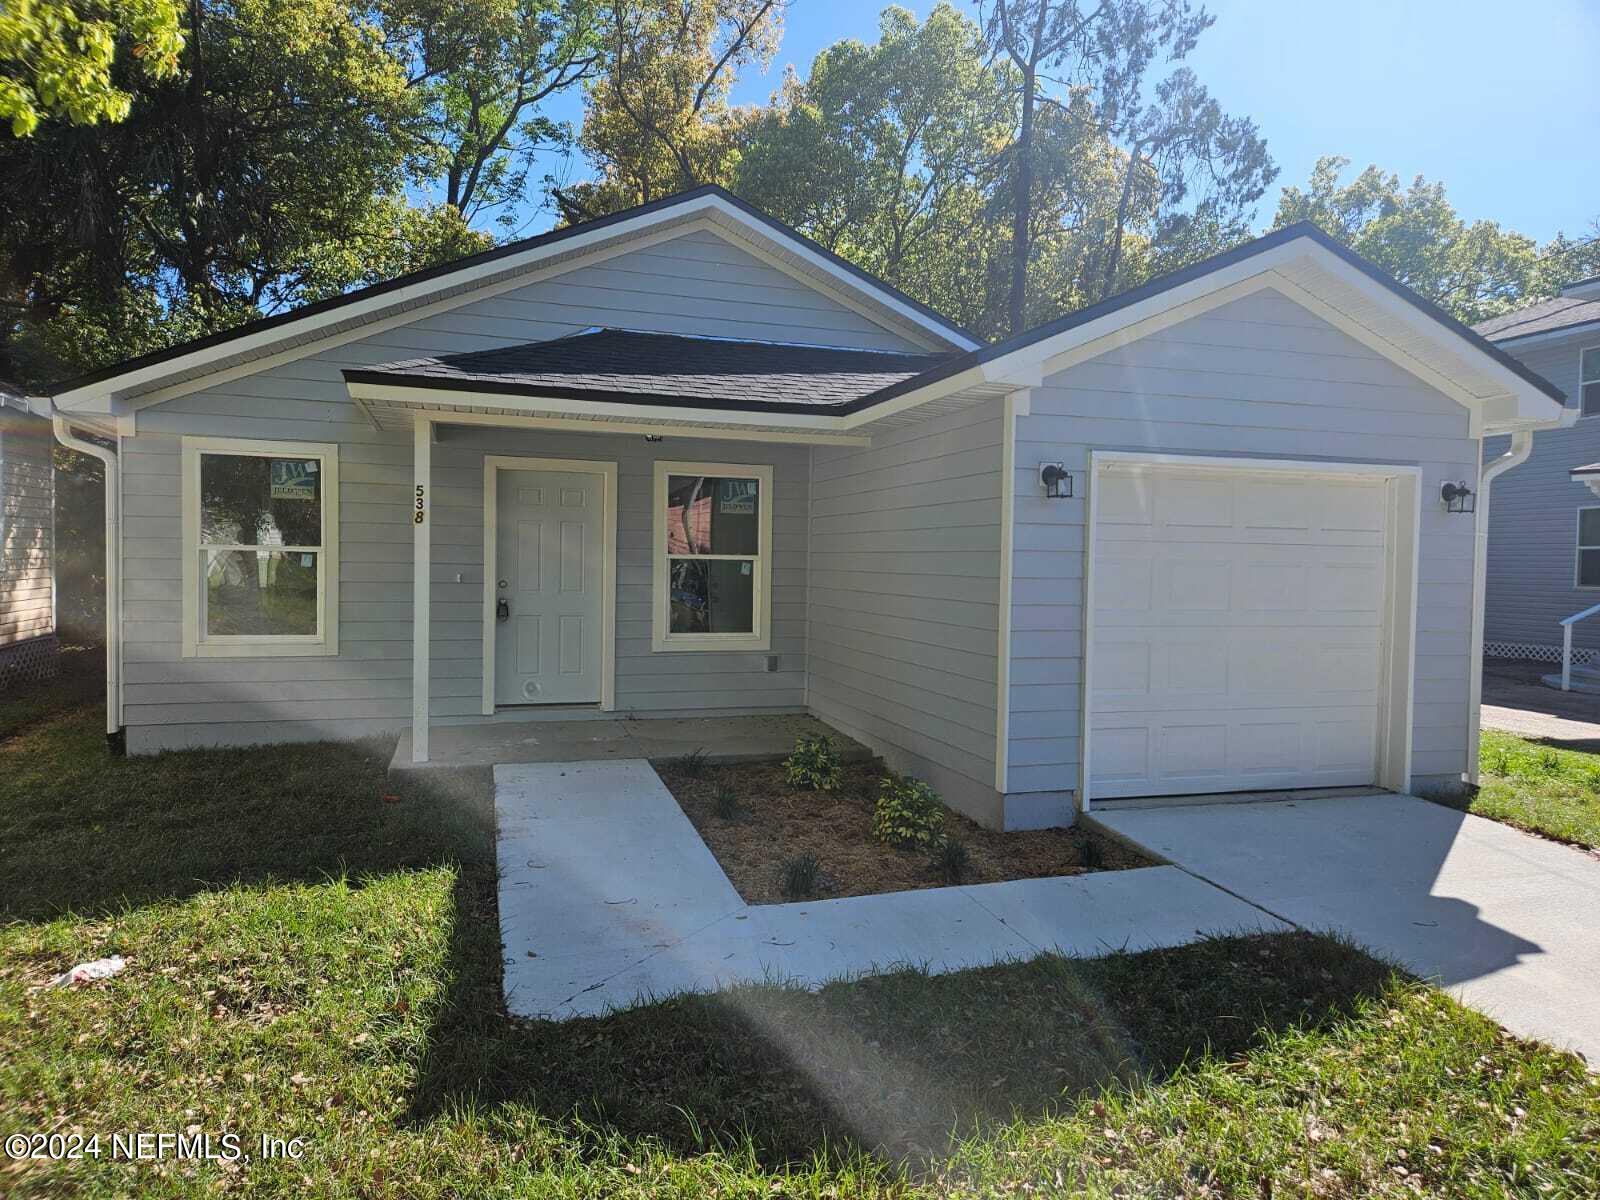 Jacksonville, FL home for sale located at 538 W 25TH Street, Jacksonville, FL 32206